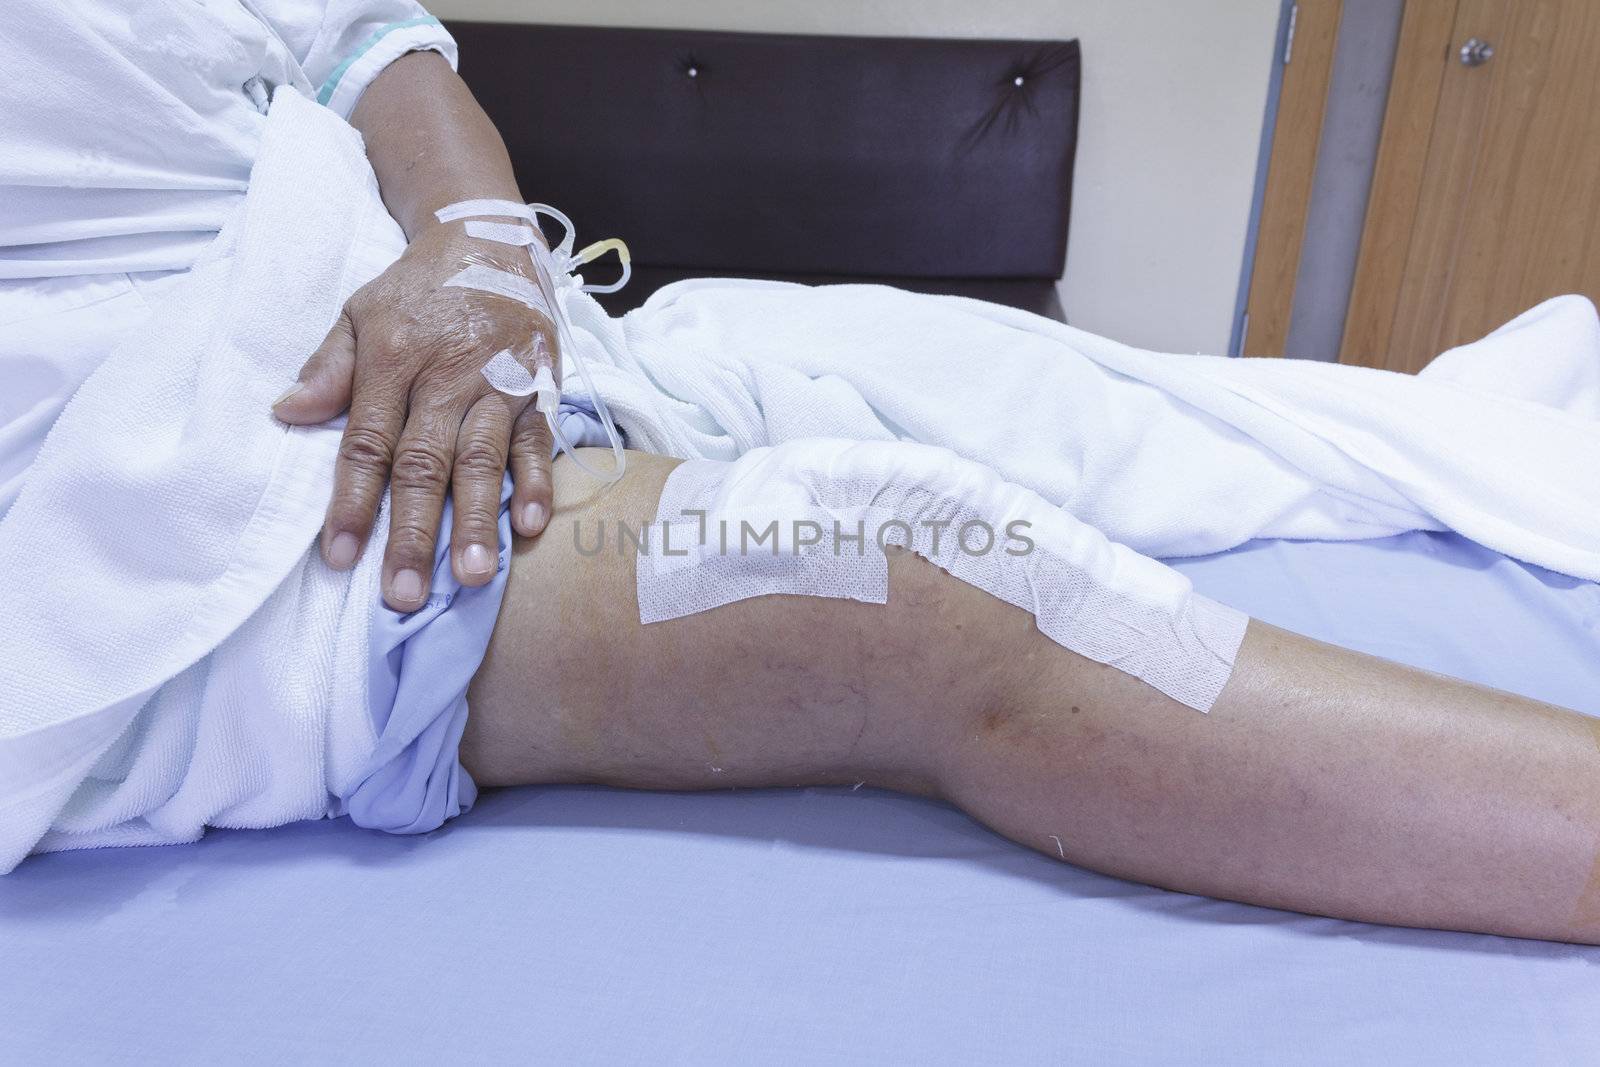 Knee replacement surgery after operation patient senior woman (60s) on the bed in hospital